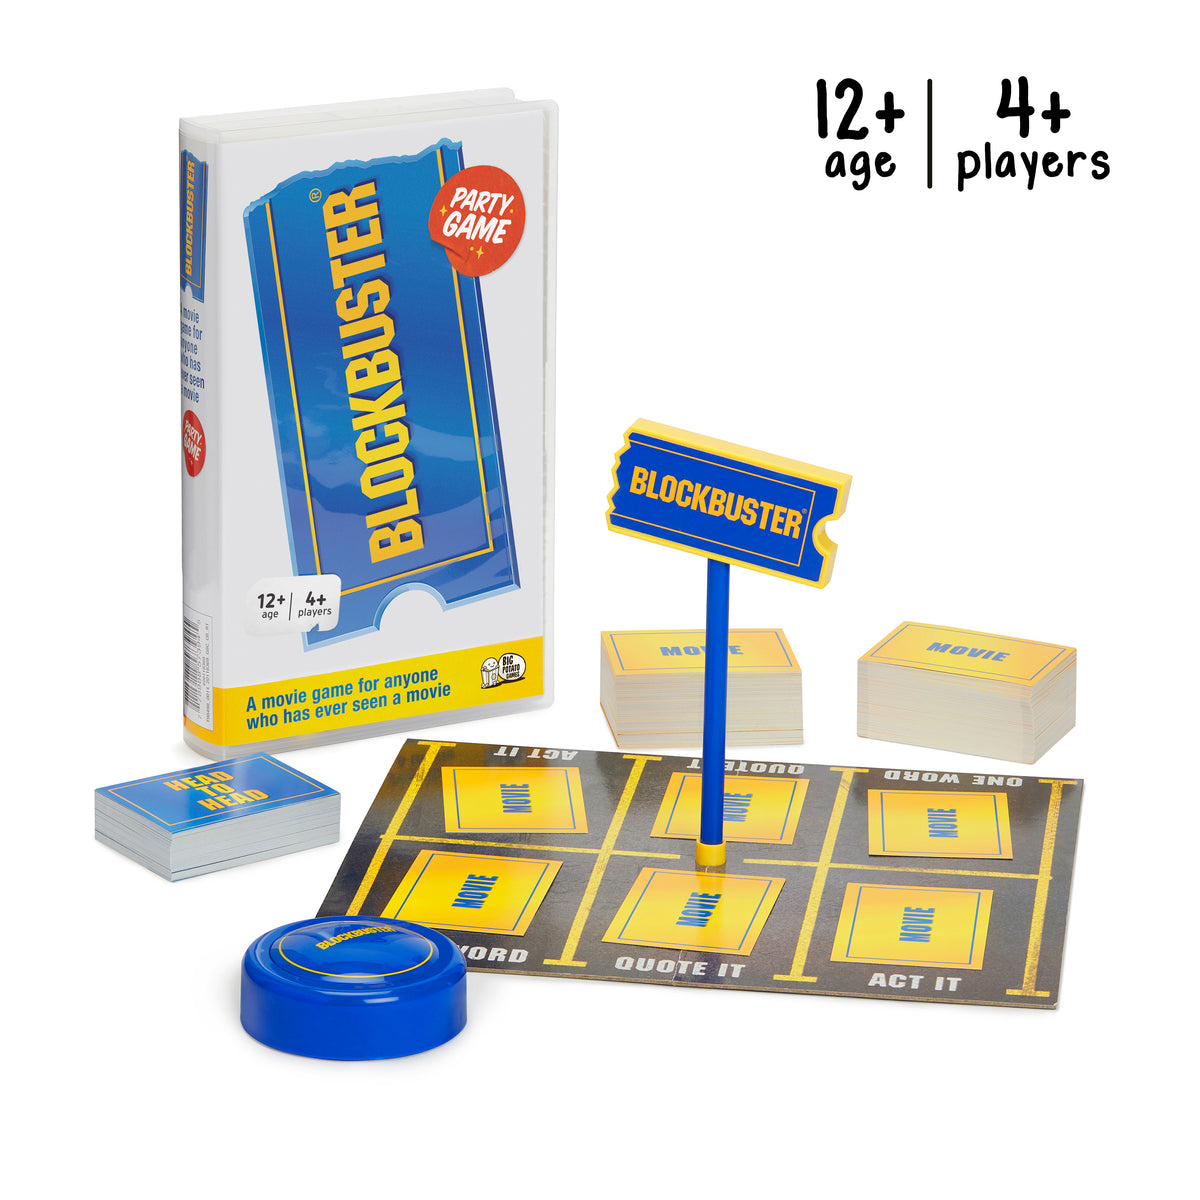 Blockbuster Movie Board Game by Big Potato at Penny Black - contents